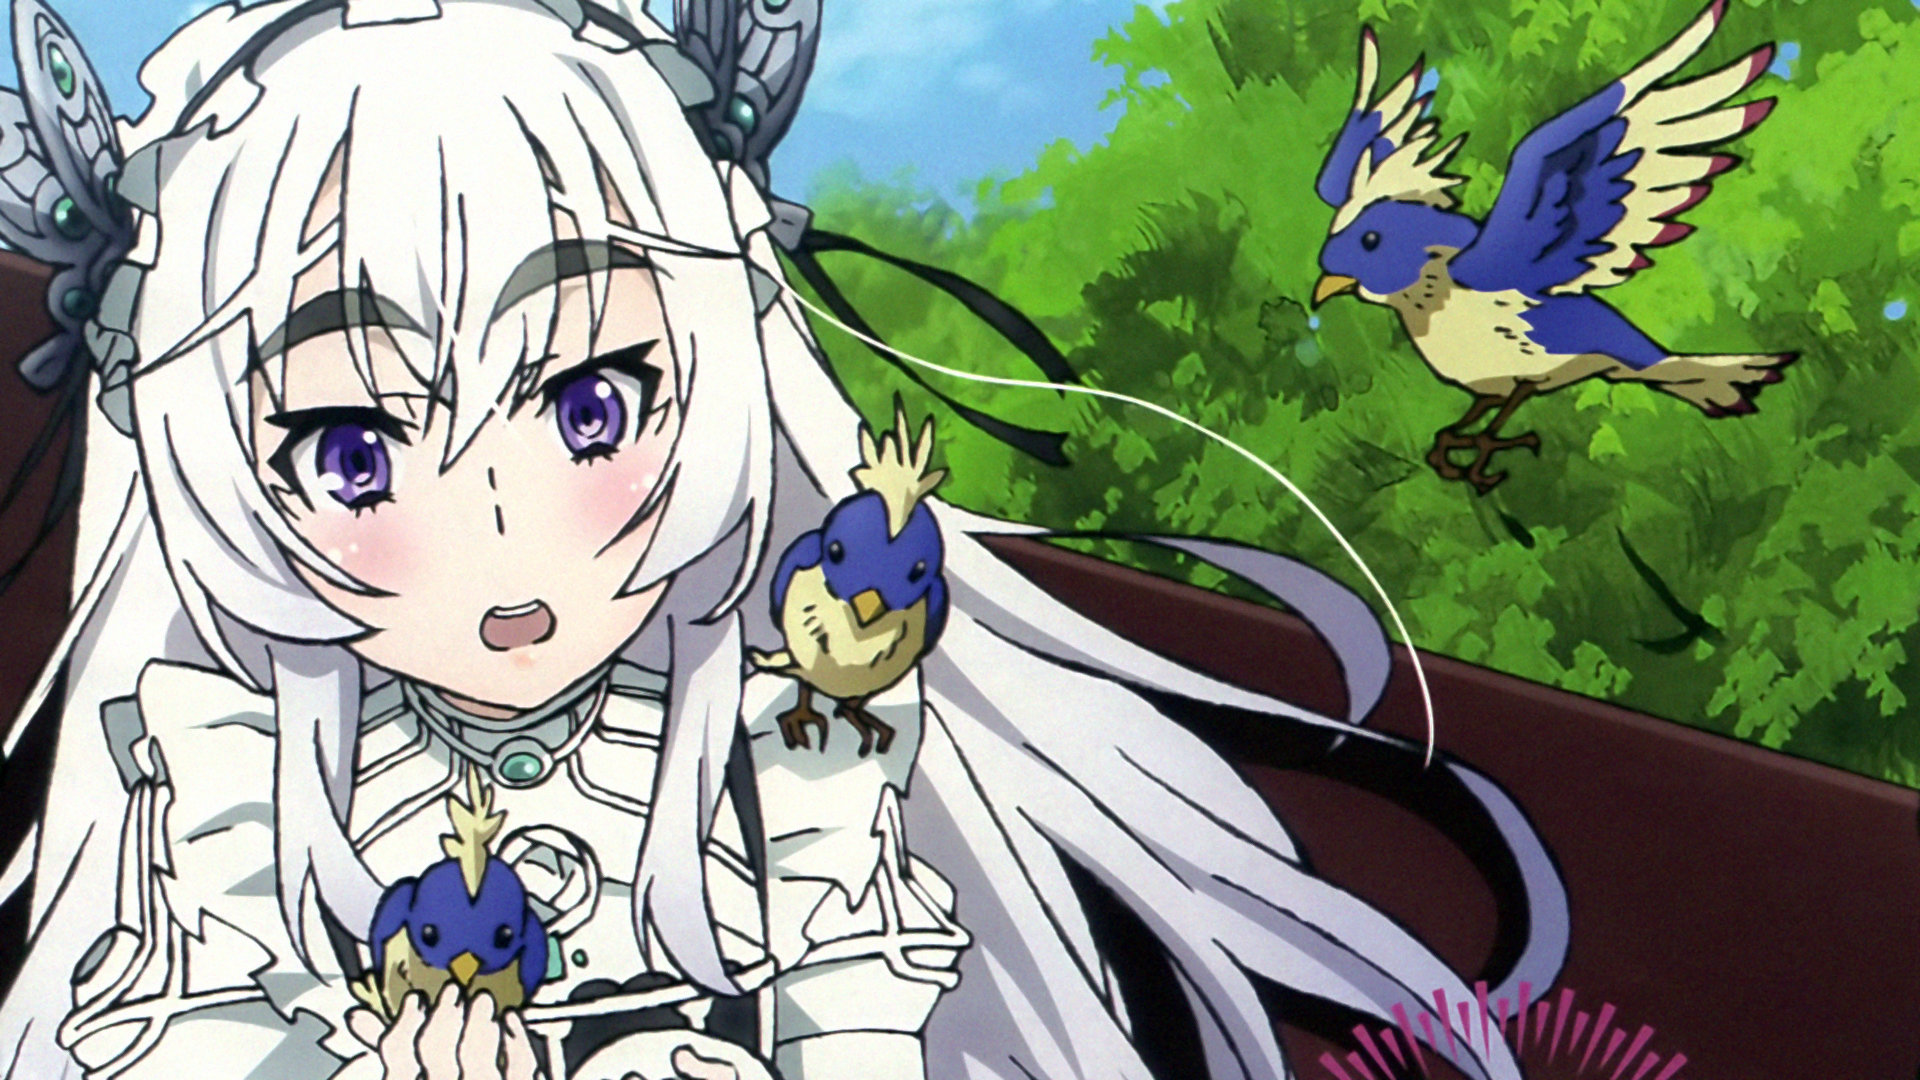 Download hd 1920x1080 Chaika -The Coffin Princess- desktop background ID:49292 for free